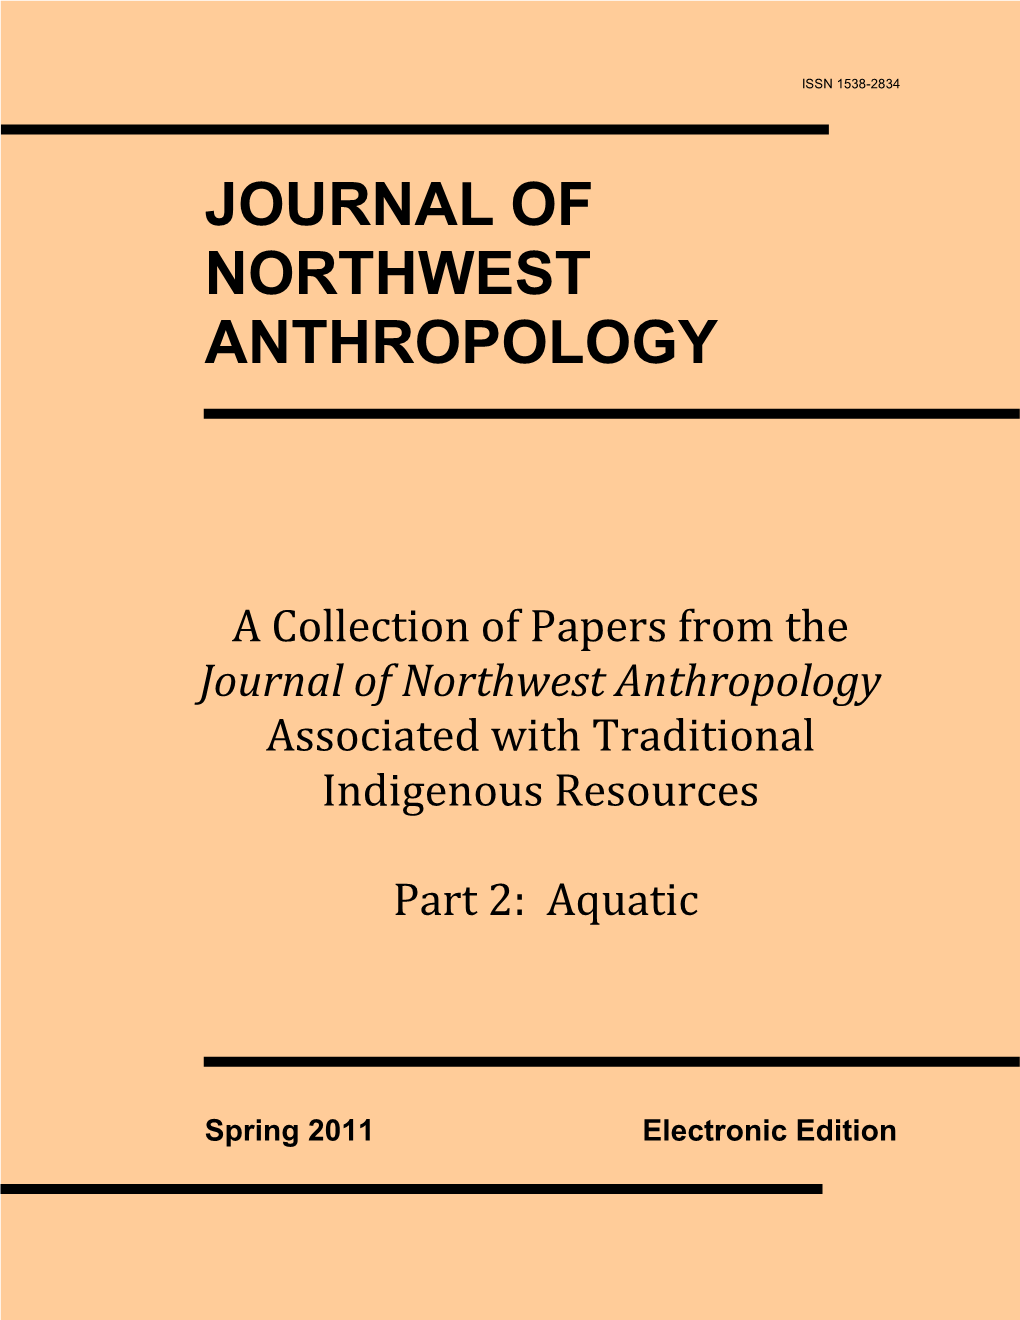 Northwest Anthropological Research Notes